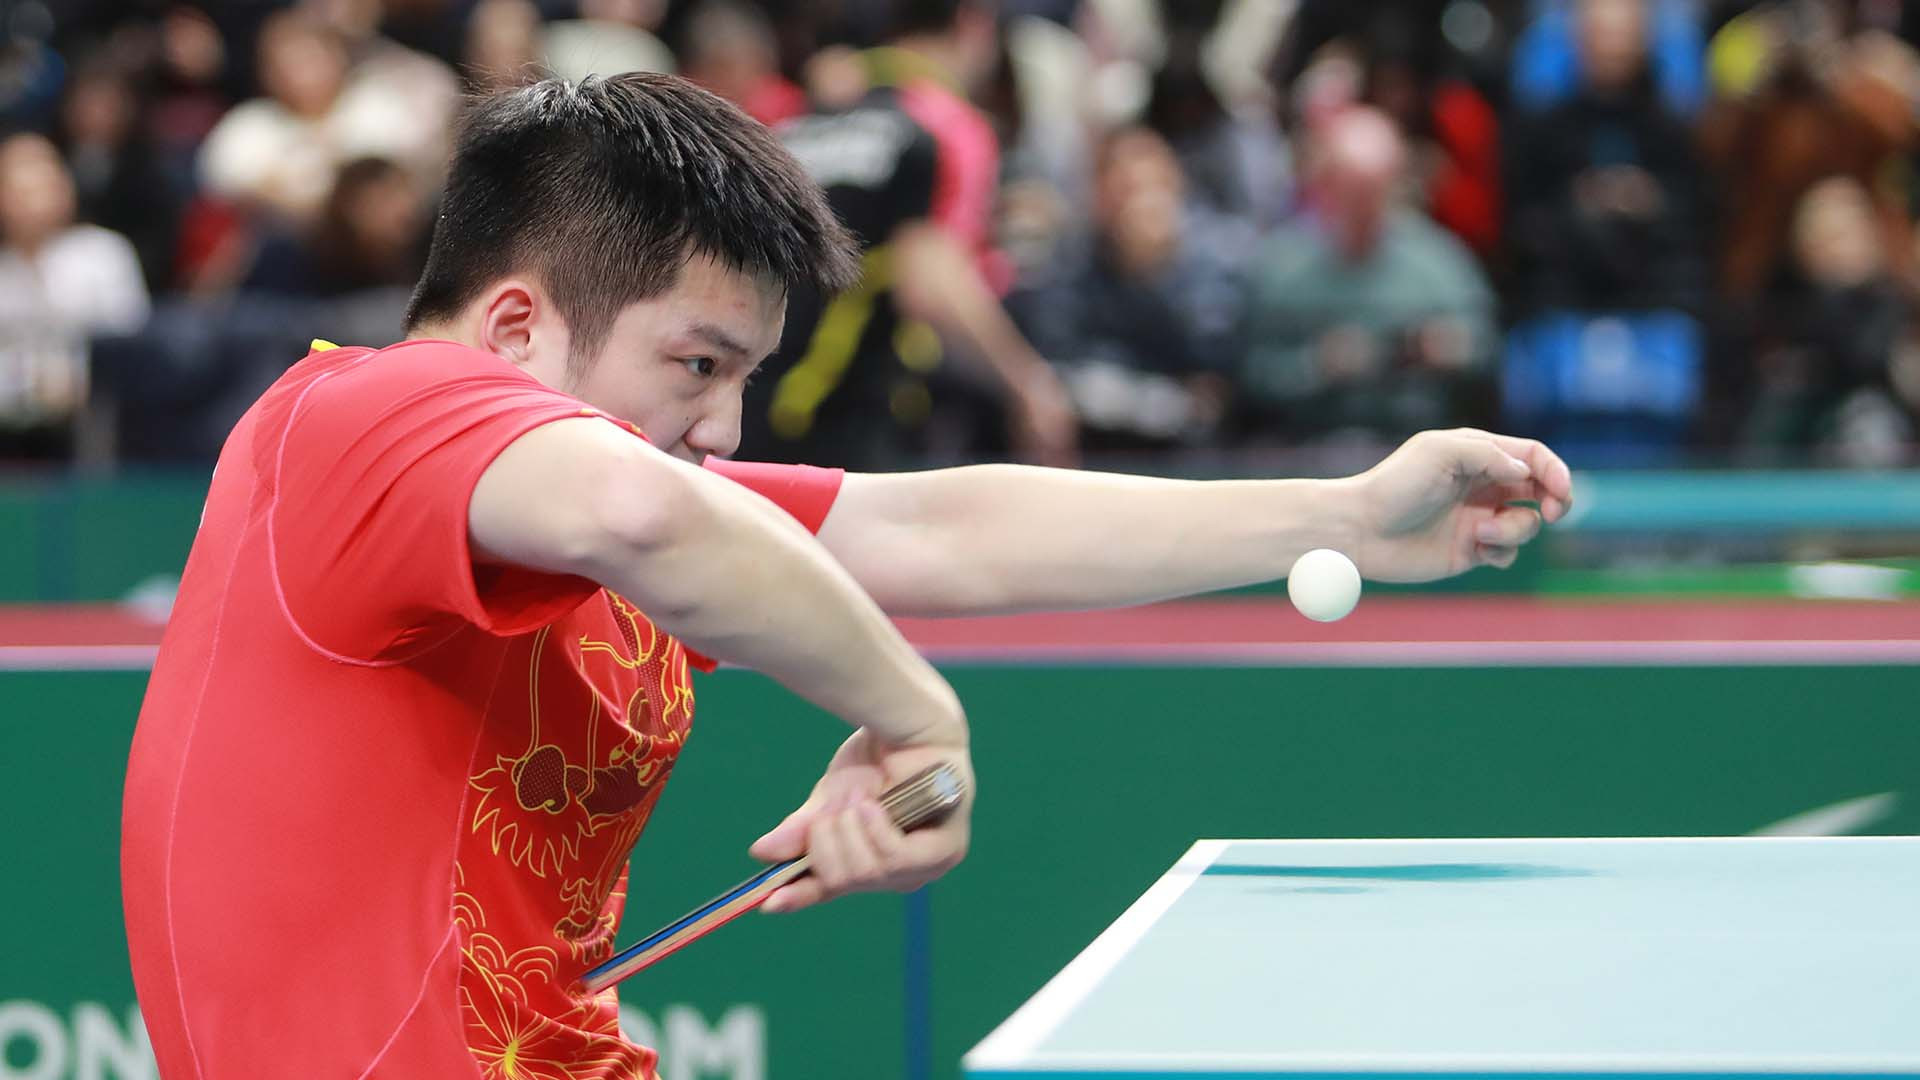 China's world number two won his decisive singles match against England's Liam Pitchford to put his country in a seventh consecutive final in the ITTF World Team Cup in London ©ITTF